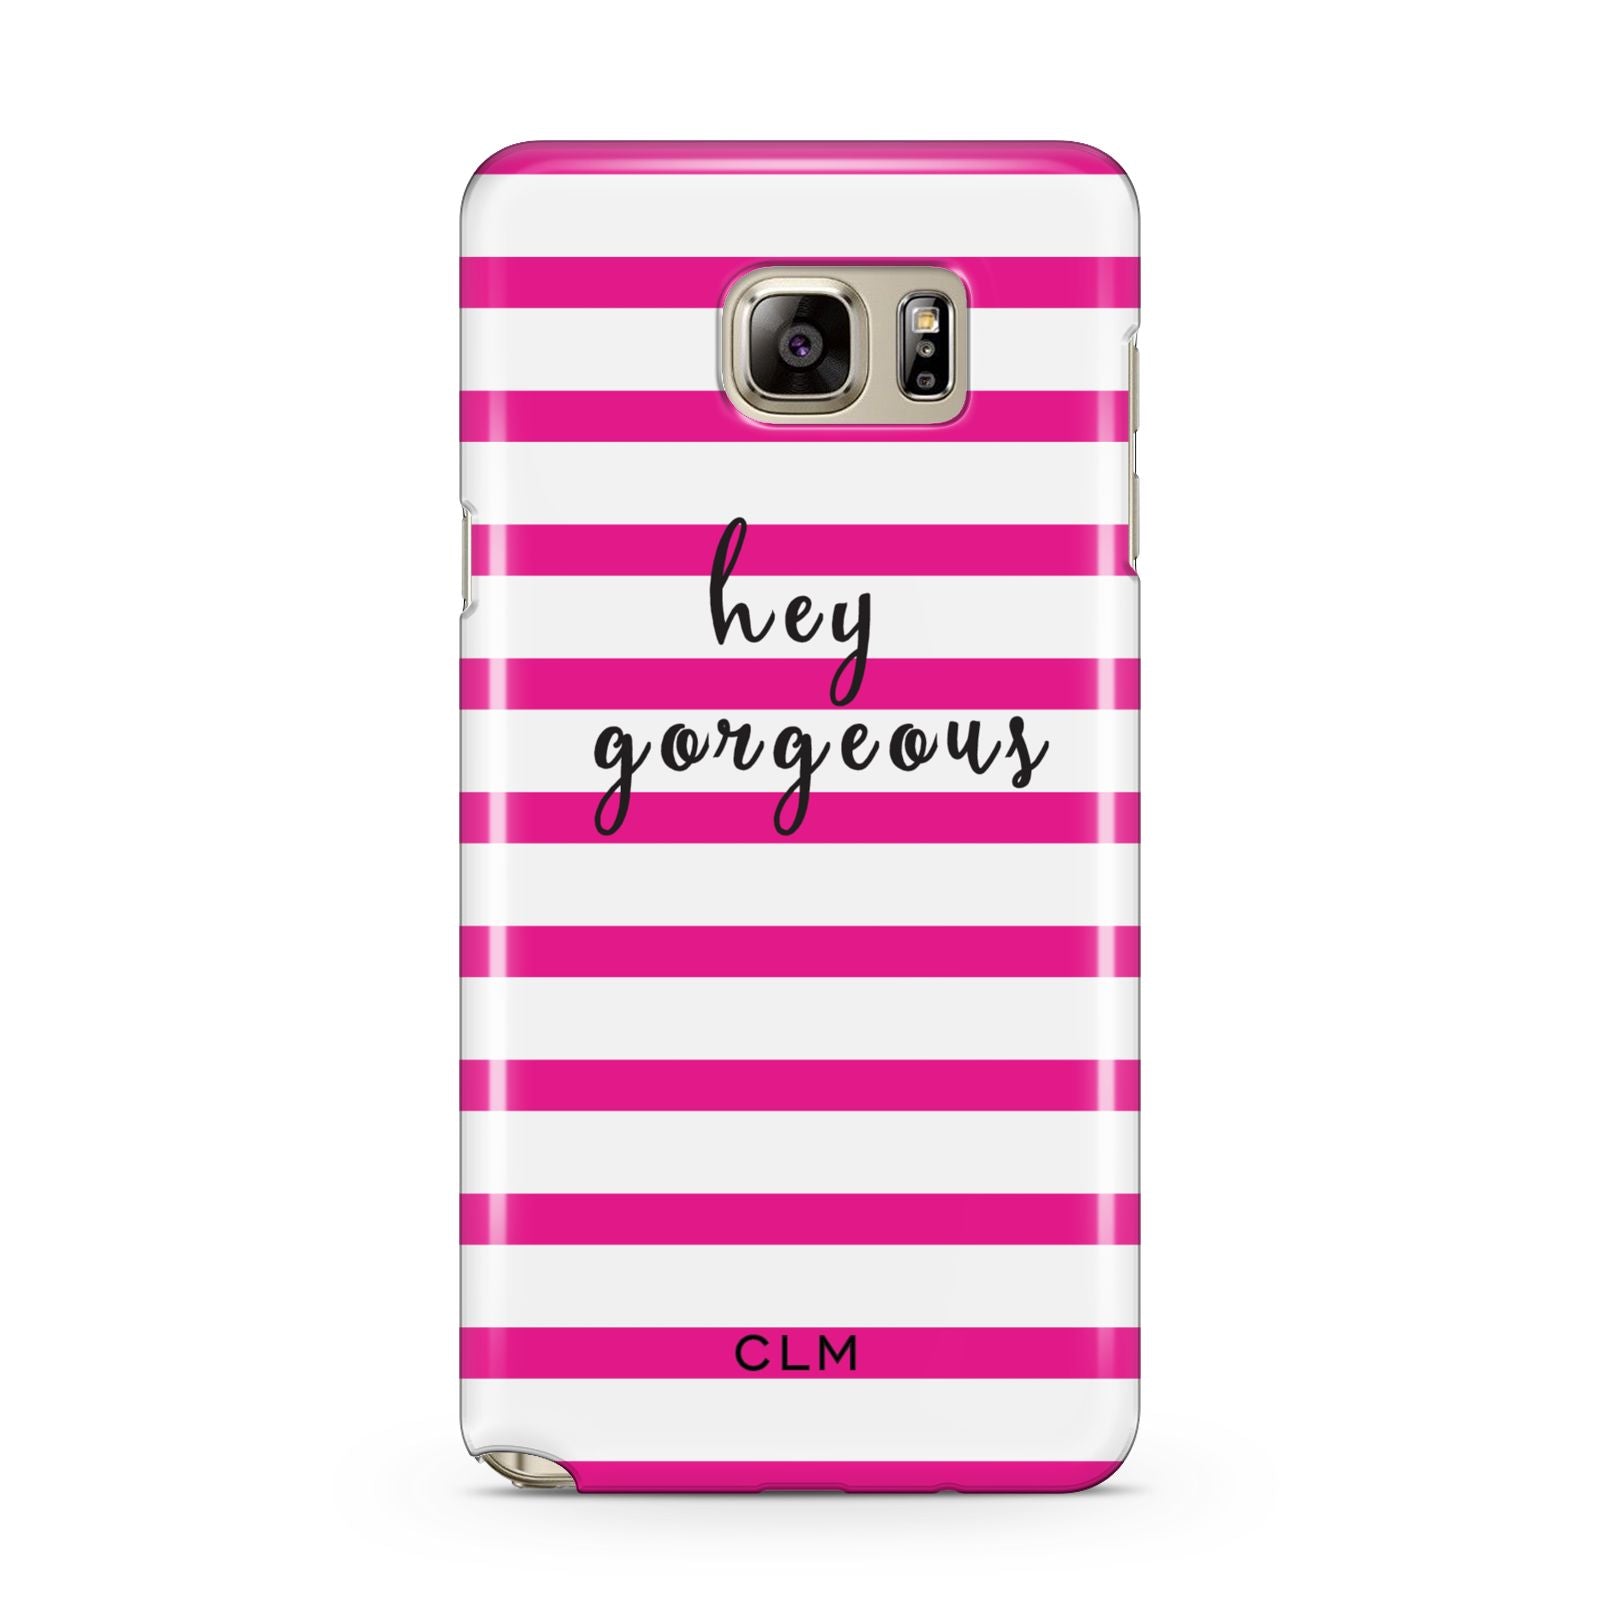 Personalised Initials Pink Striped Samsung Galaxy Note 5 Case